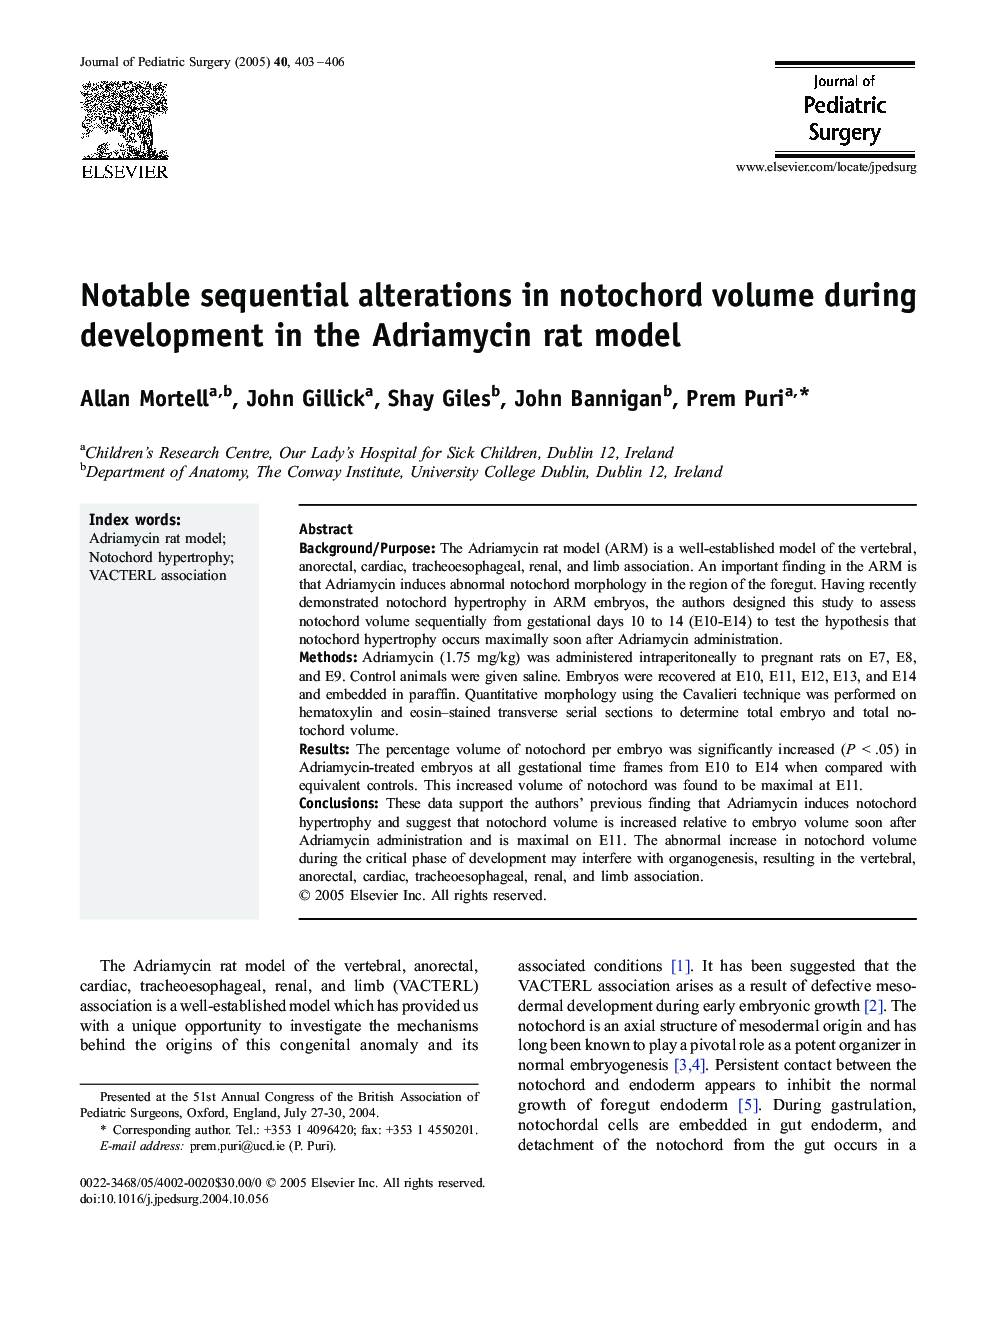 Notable sequential alterations in notochord volume during development in the Adriamycin rat model